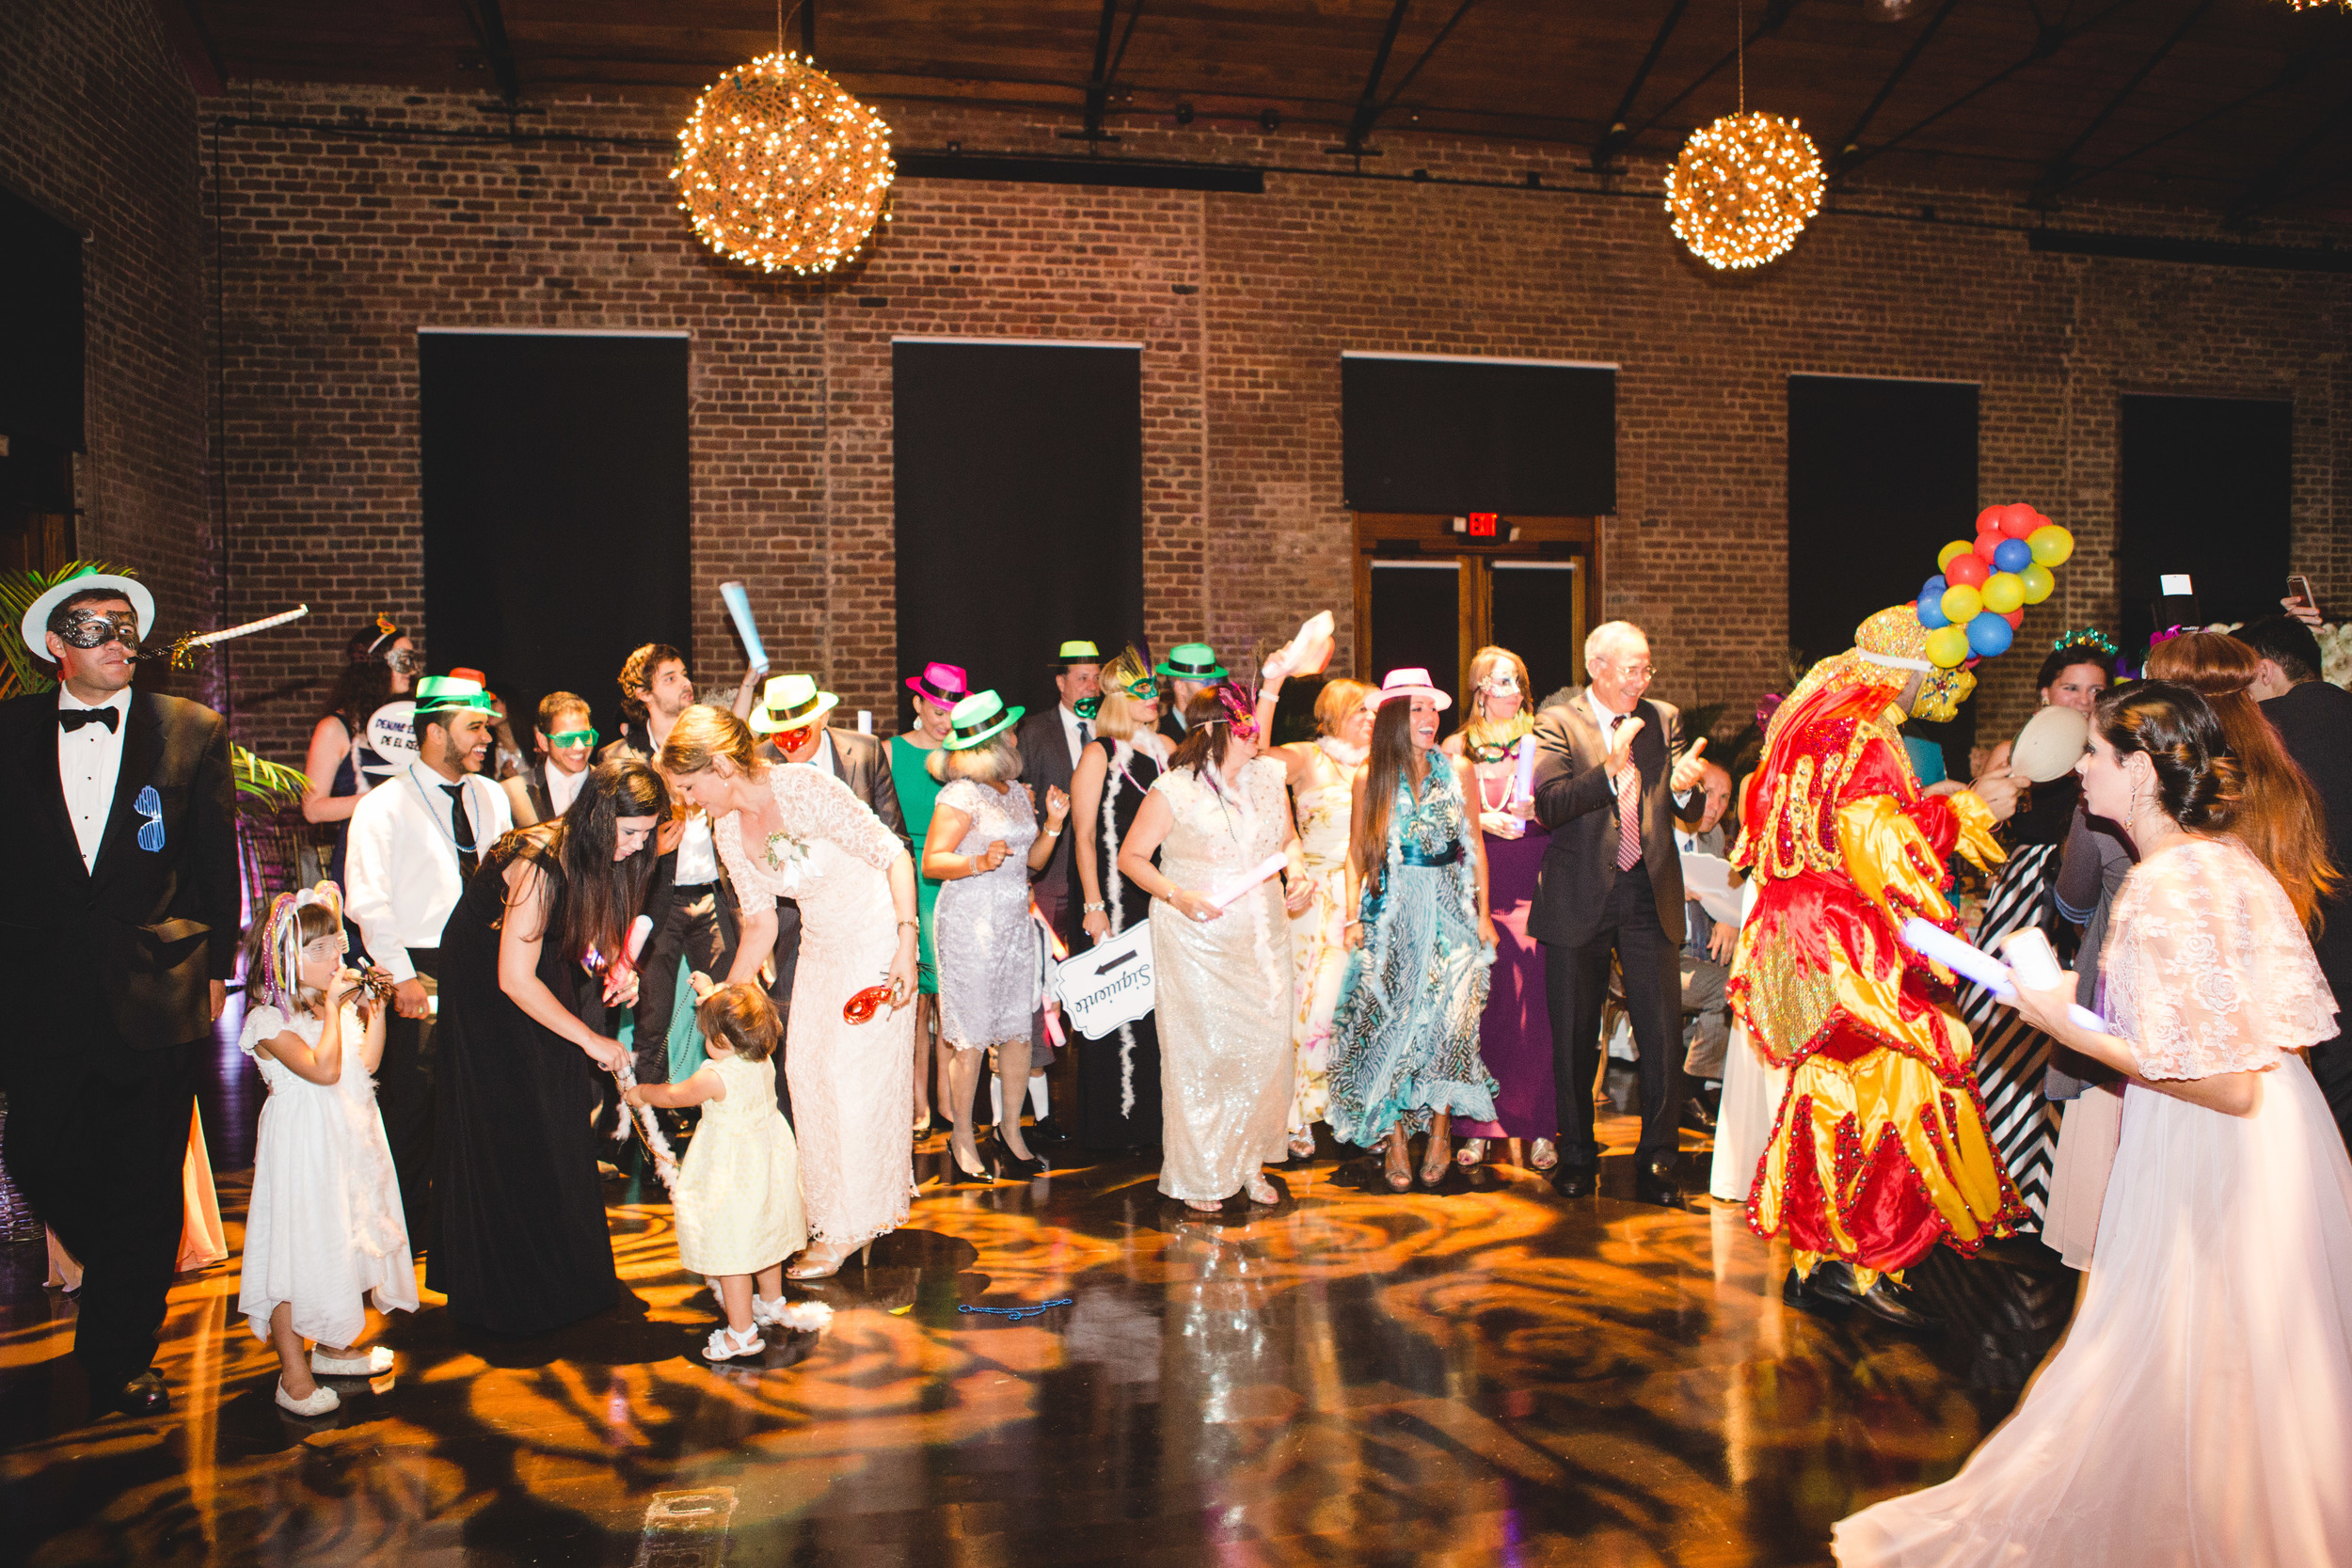 daniela-and-pedro-wedding-izzy-hudgins-photography-a-to-zinnias-whitfield-square-charles-h-morris-center-wedding-ivoyy-and-beau-bridal-boutique-dorie-hayley-paige-savannah-wedding-planner-savannah-bridal-boutique-savannah-weddings-54.jpg